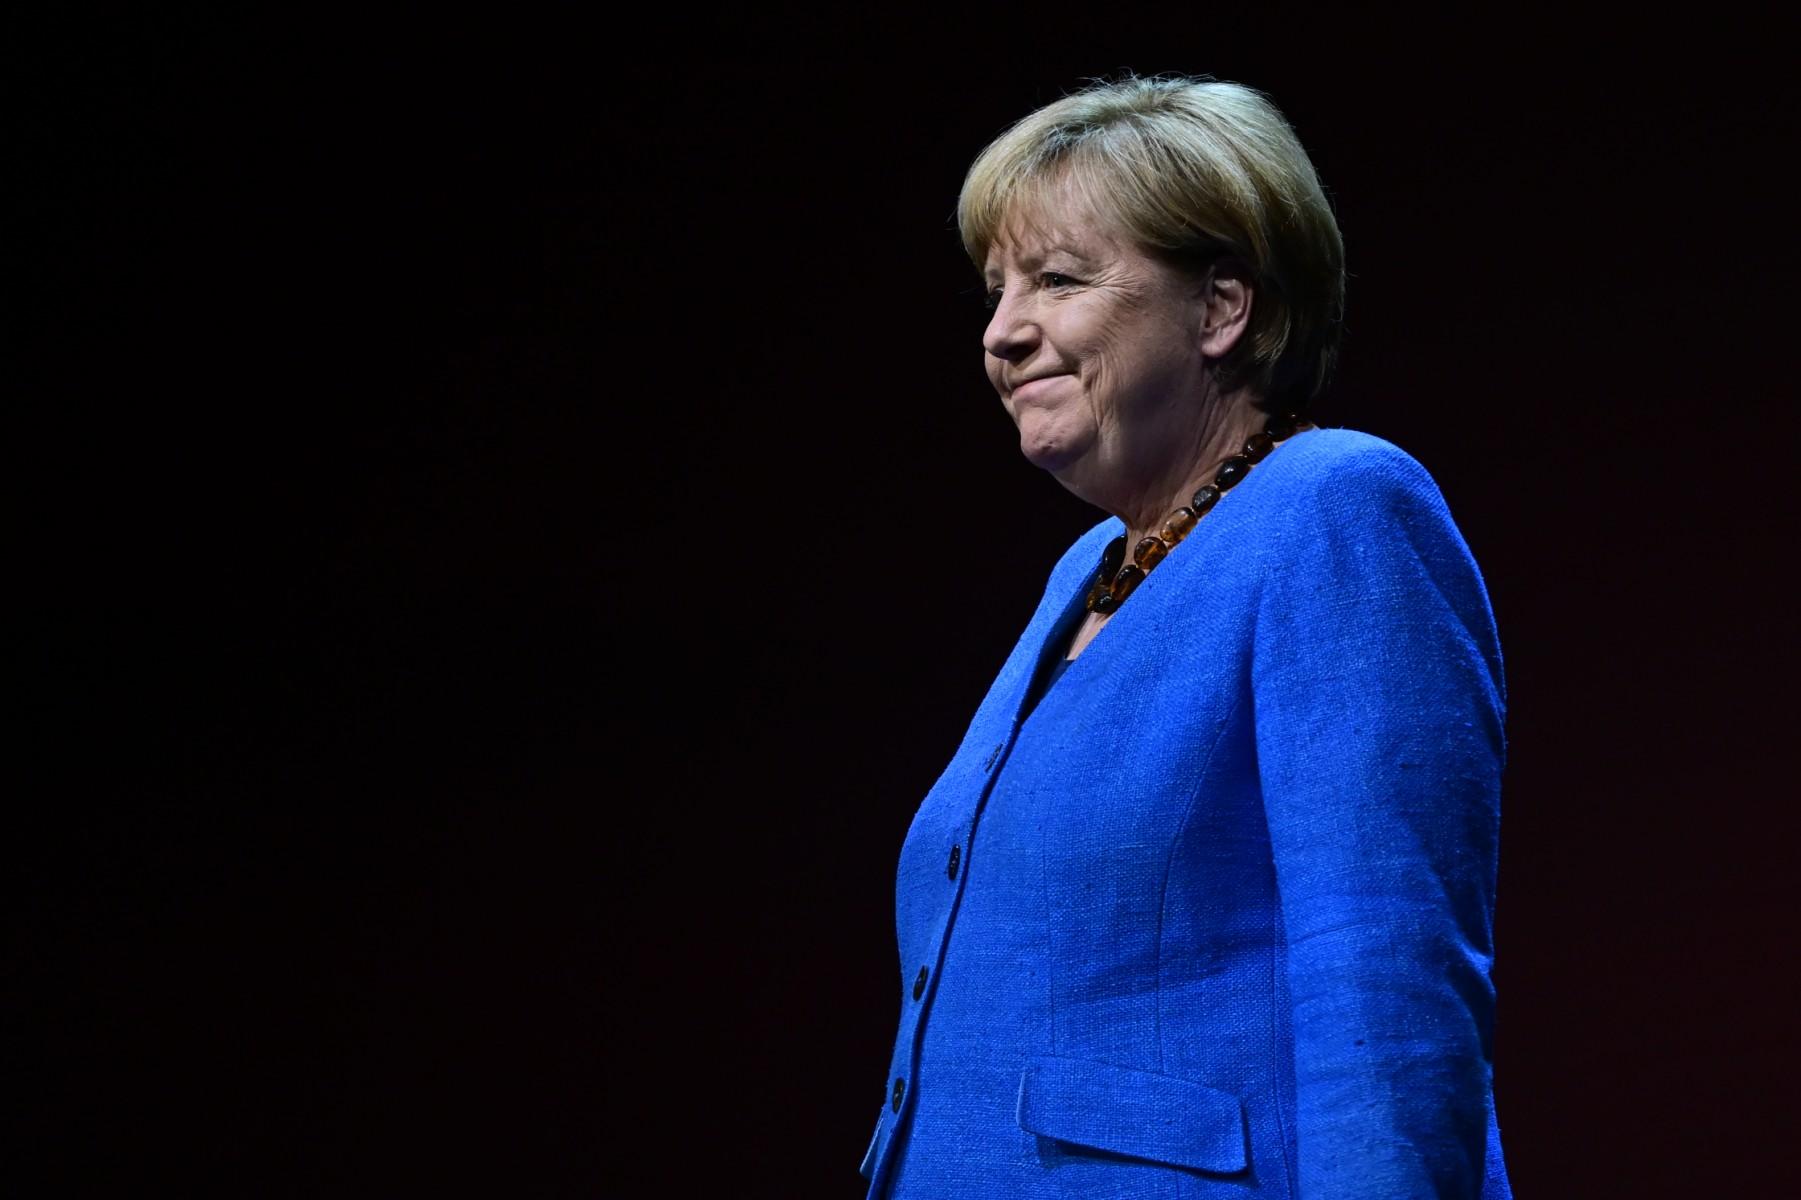 Former German chancellor Angela Merkel arrives on stage for her first public interview since stepping down, at the Berliner Ensemble theatre in Berlin on June 7. Photo: AFP